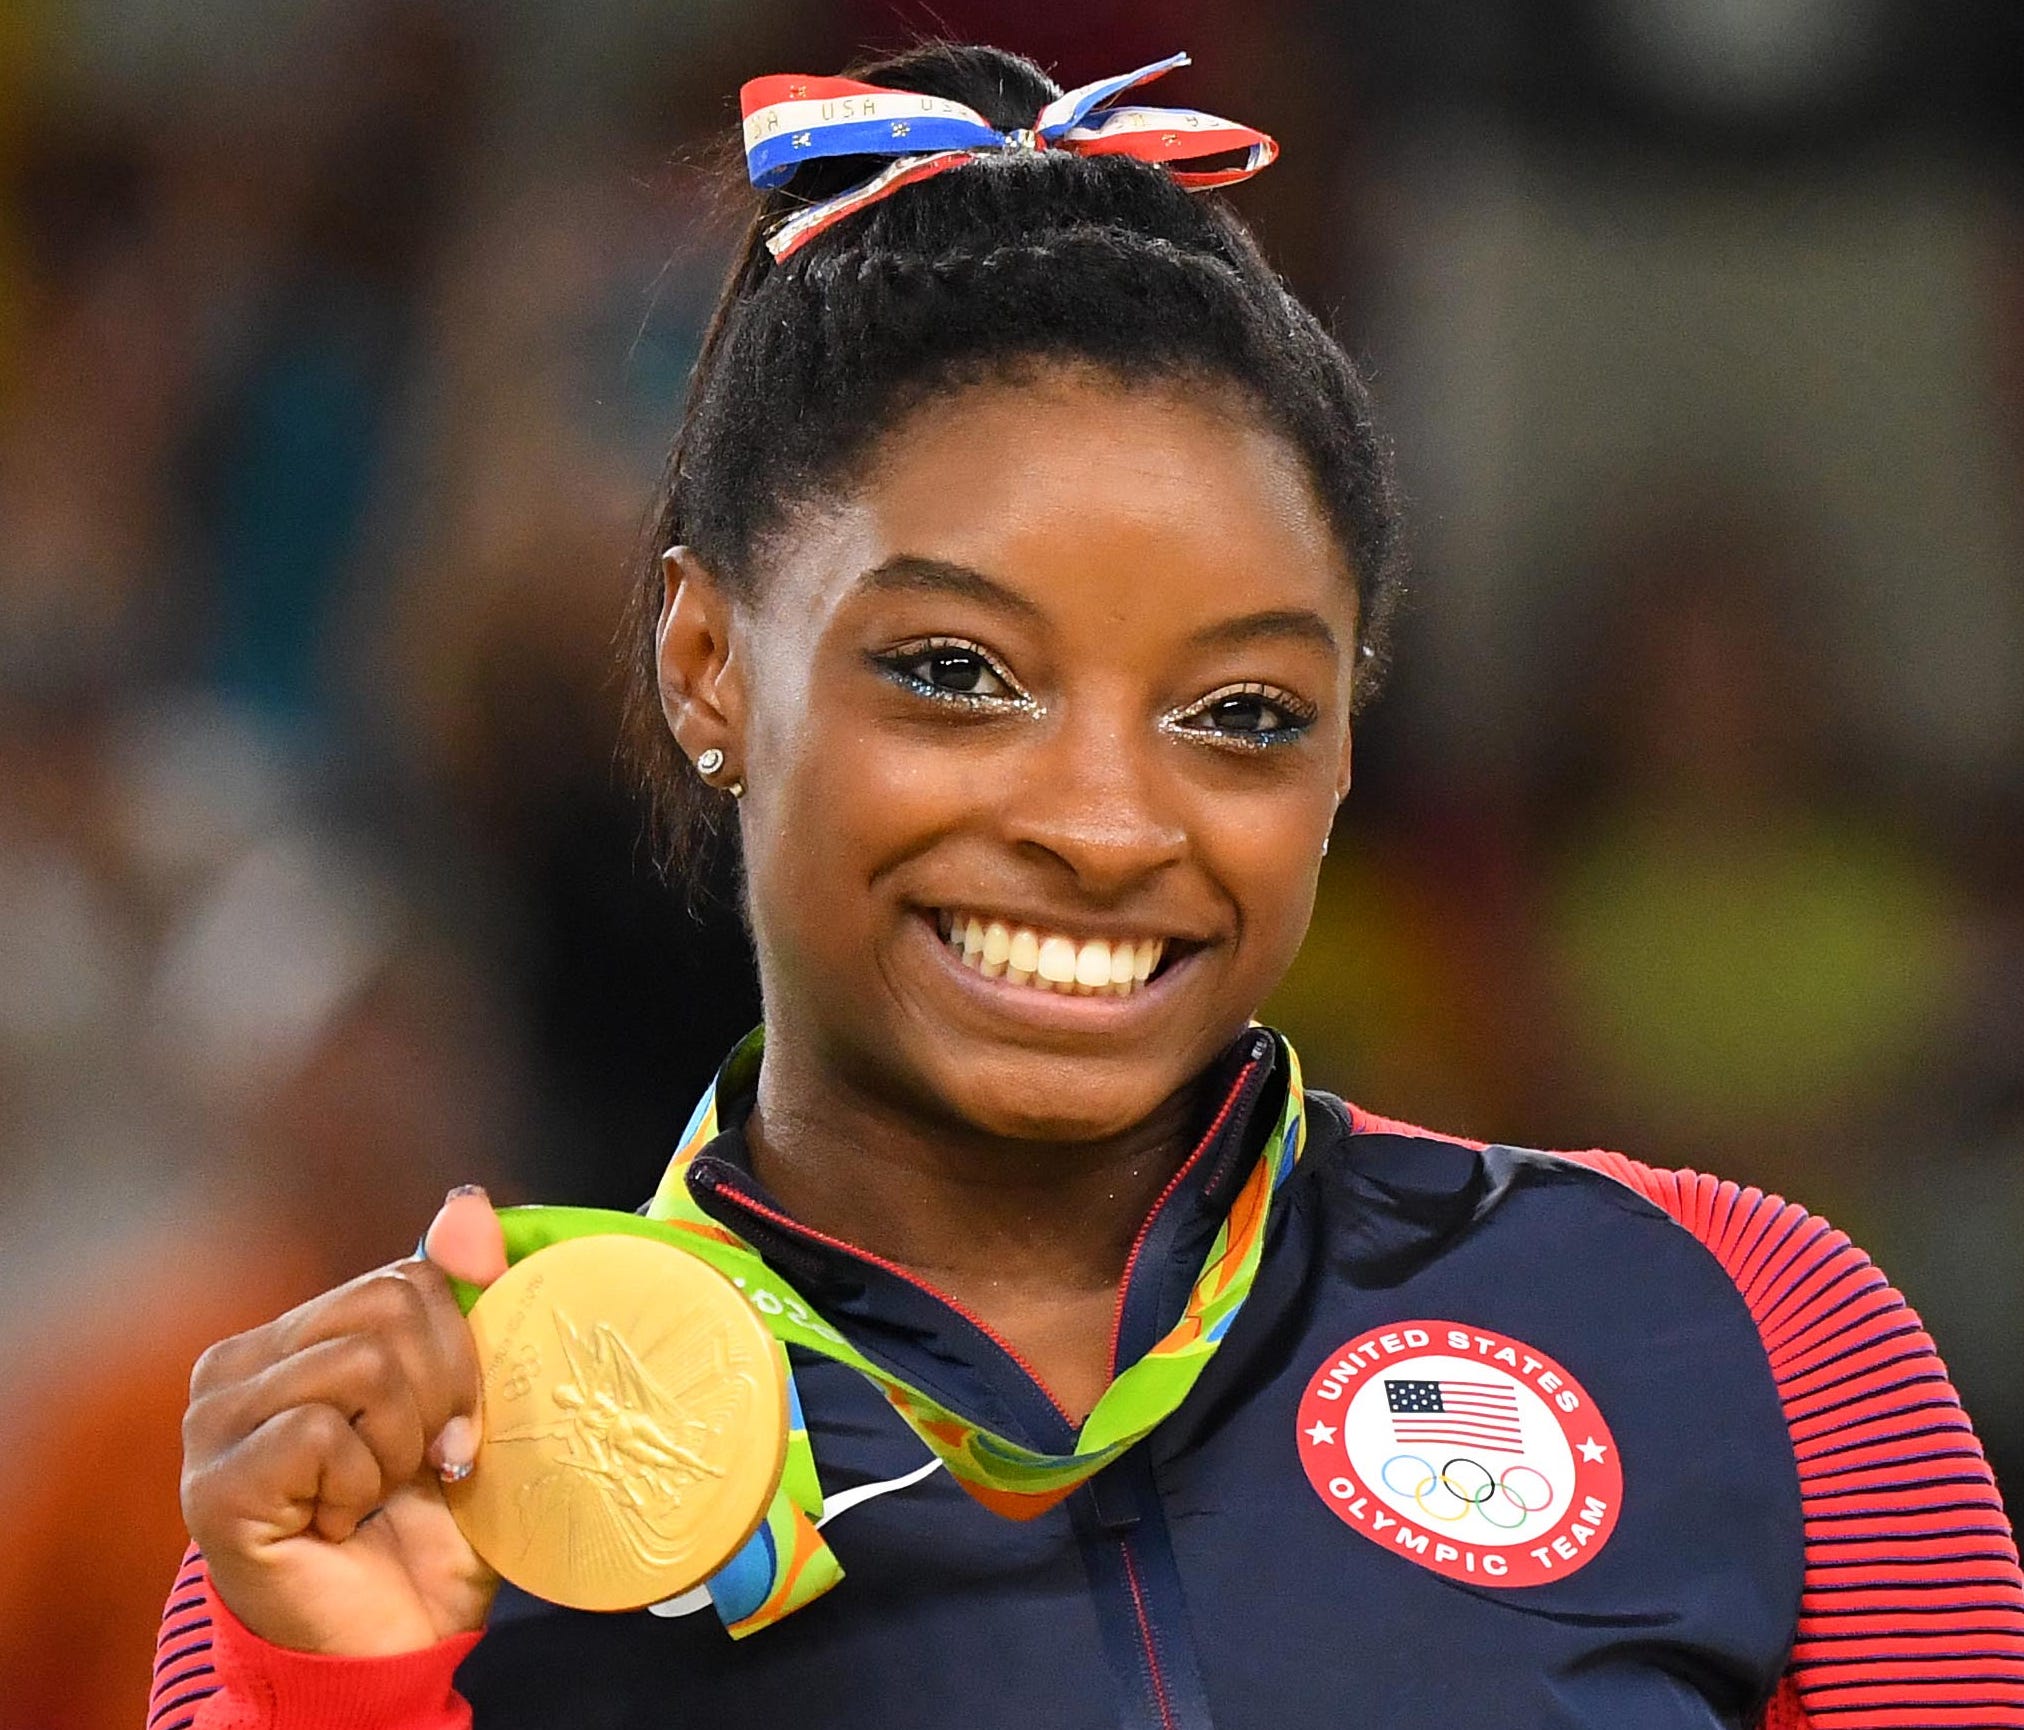 Simone Biles revealed in a post Monday she was a victim of sexual abuse.